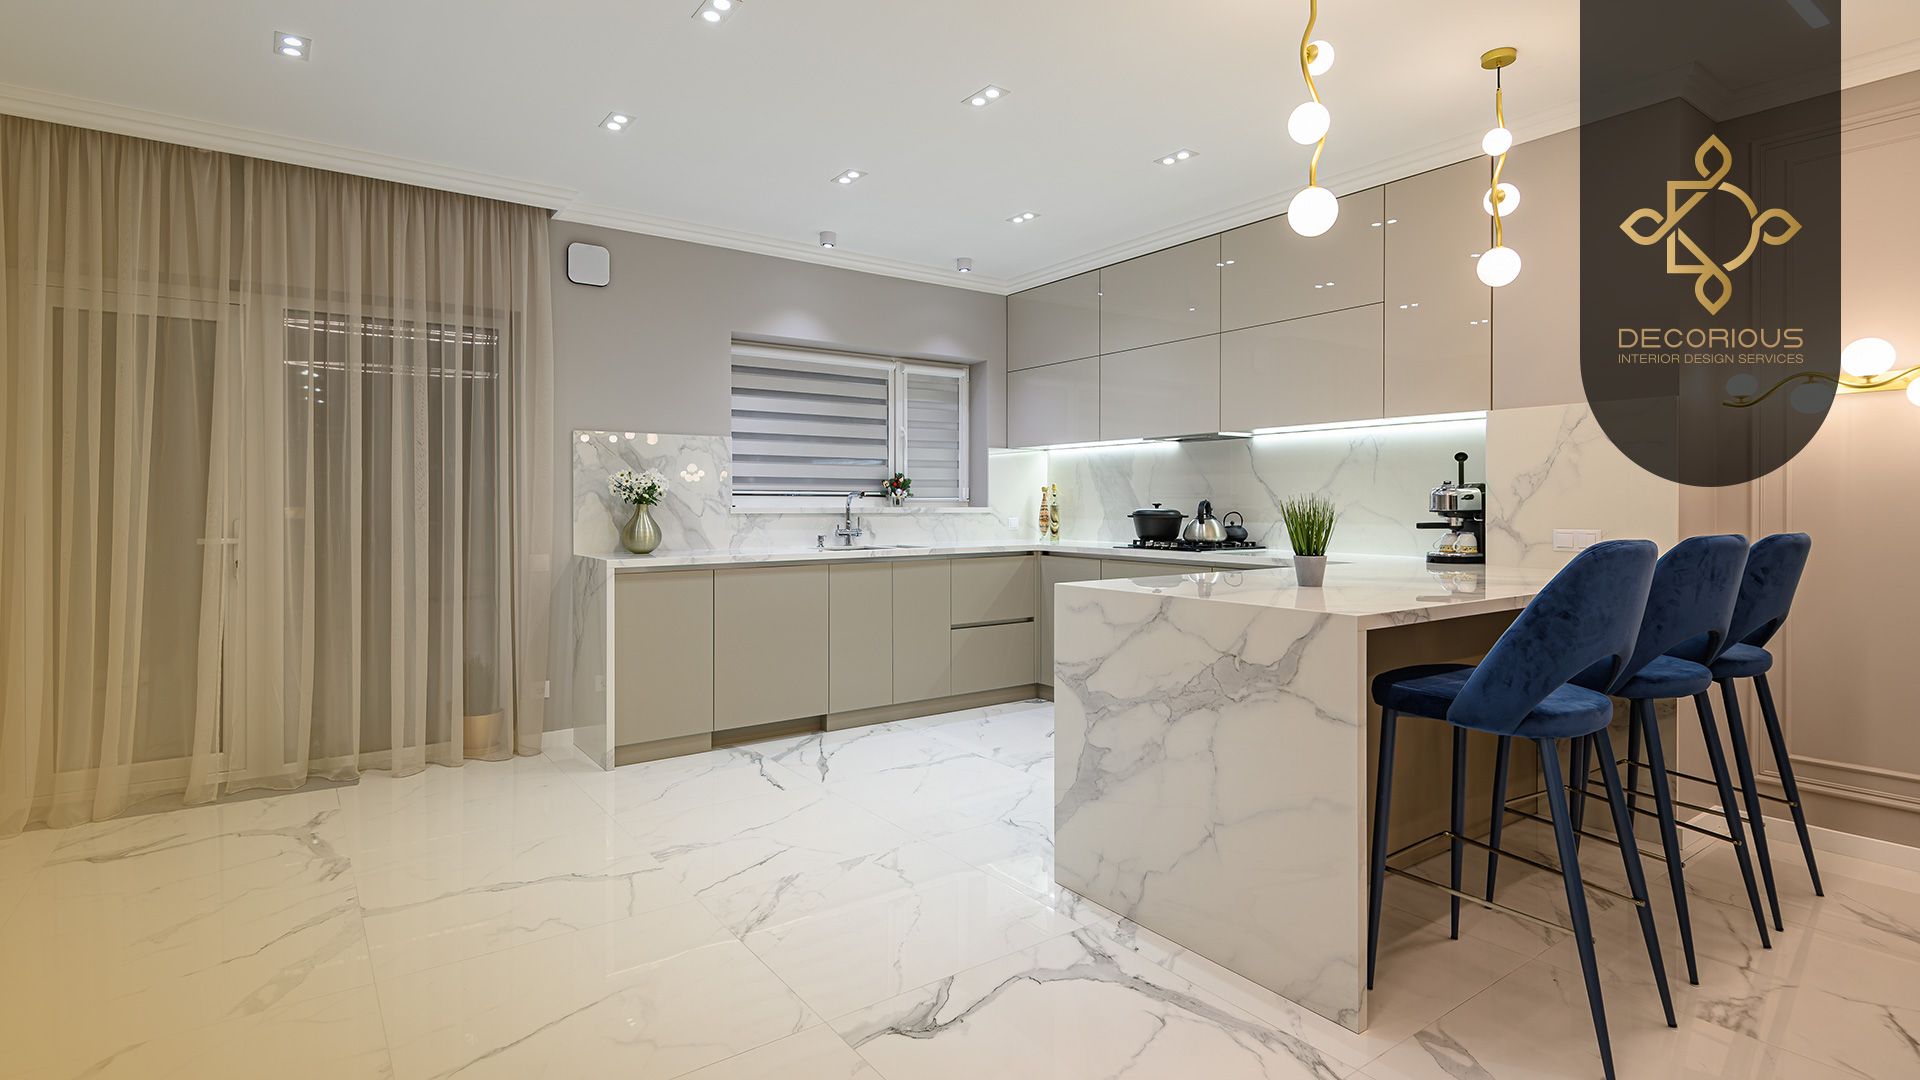 What Are The Benefits of Having Marble Flooring in Your Home?